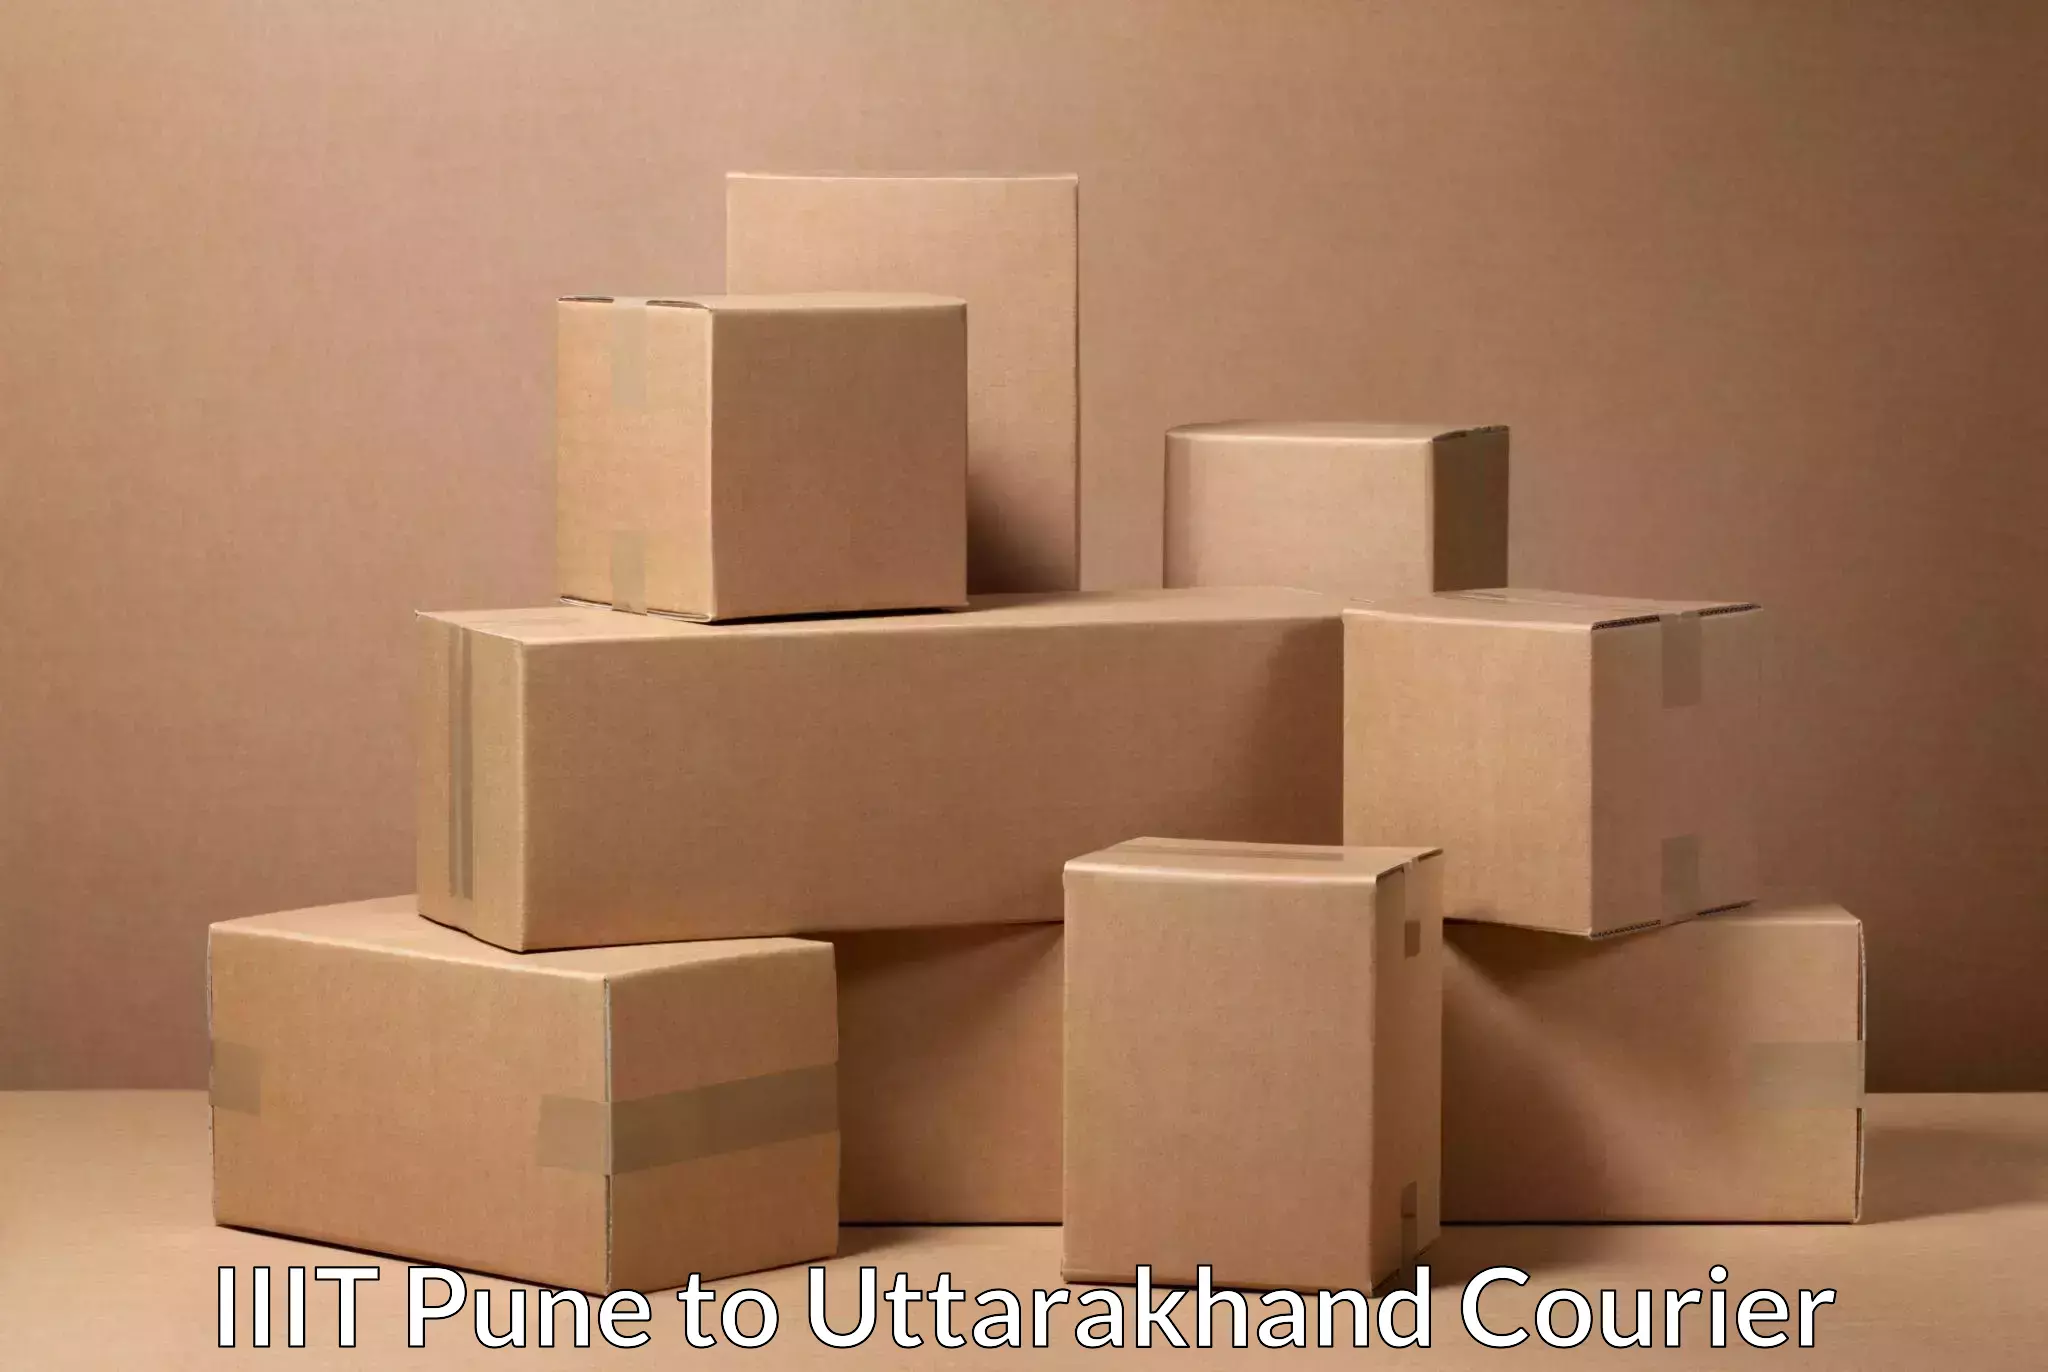 Seamless shipping service IIIT Pune to Roorkee